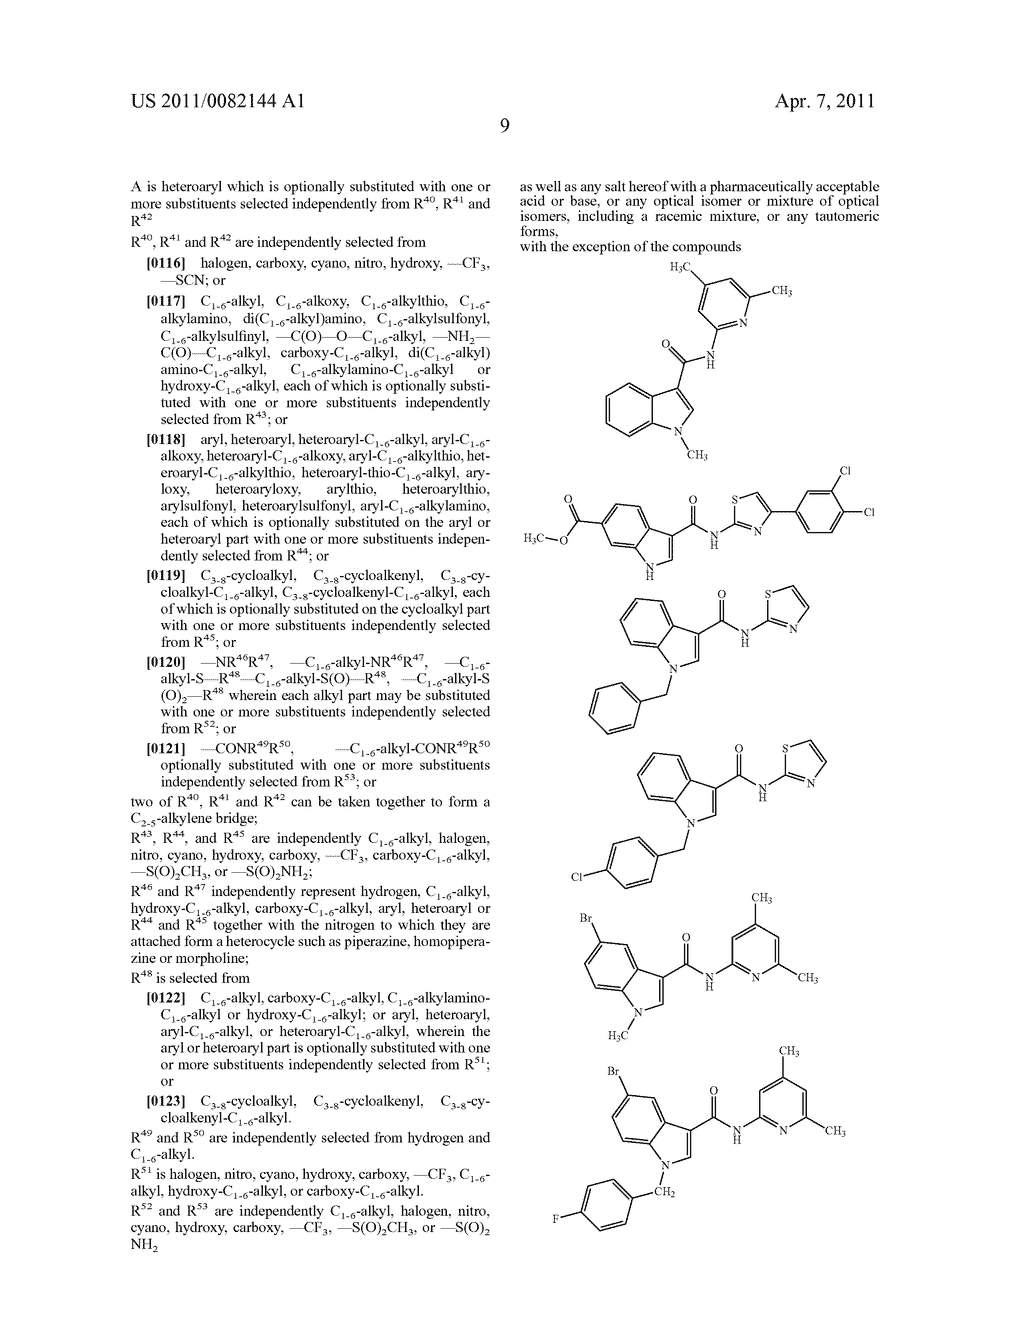 N-HETEROARYL INDOLE CARBOXAMIDES AND ANALOGUES THEREOF, FOR USE AS GLUCOKINASE ACTIVATORS IN THE TREATMENT OF DIABETES - diagram, schematic, and image 10